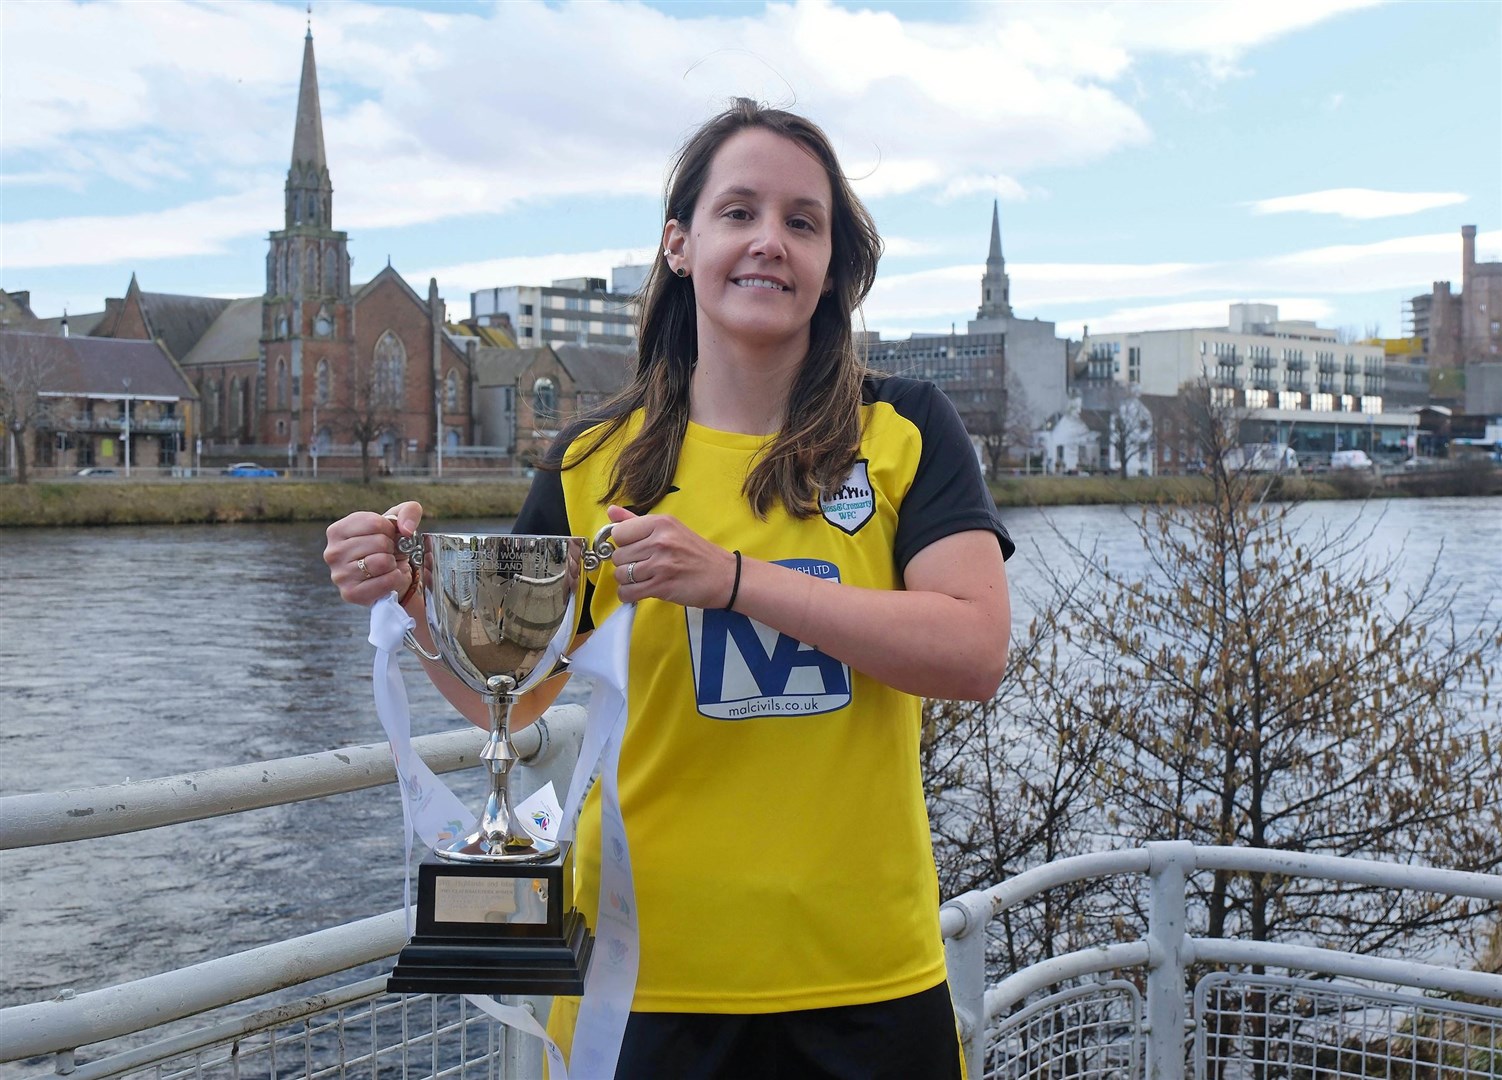 Ross and Cromarty player Lauren Fraser with the Highlands and Islands League trophy at the season's launch event in Inverness earlier this week. Picture: Aimee Todd/Sportpix